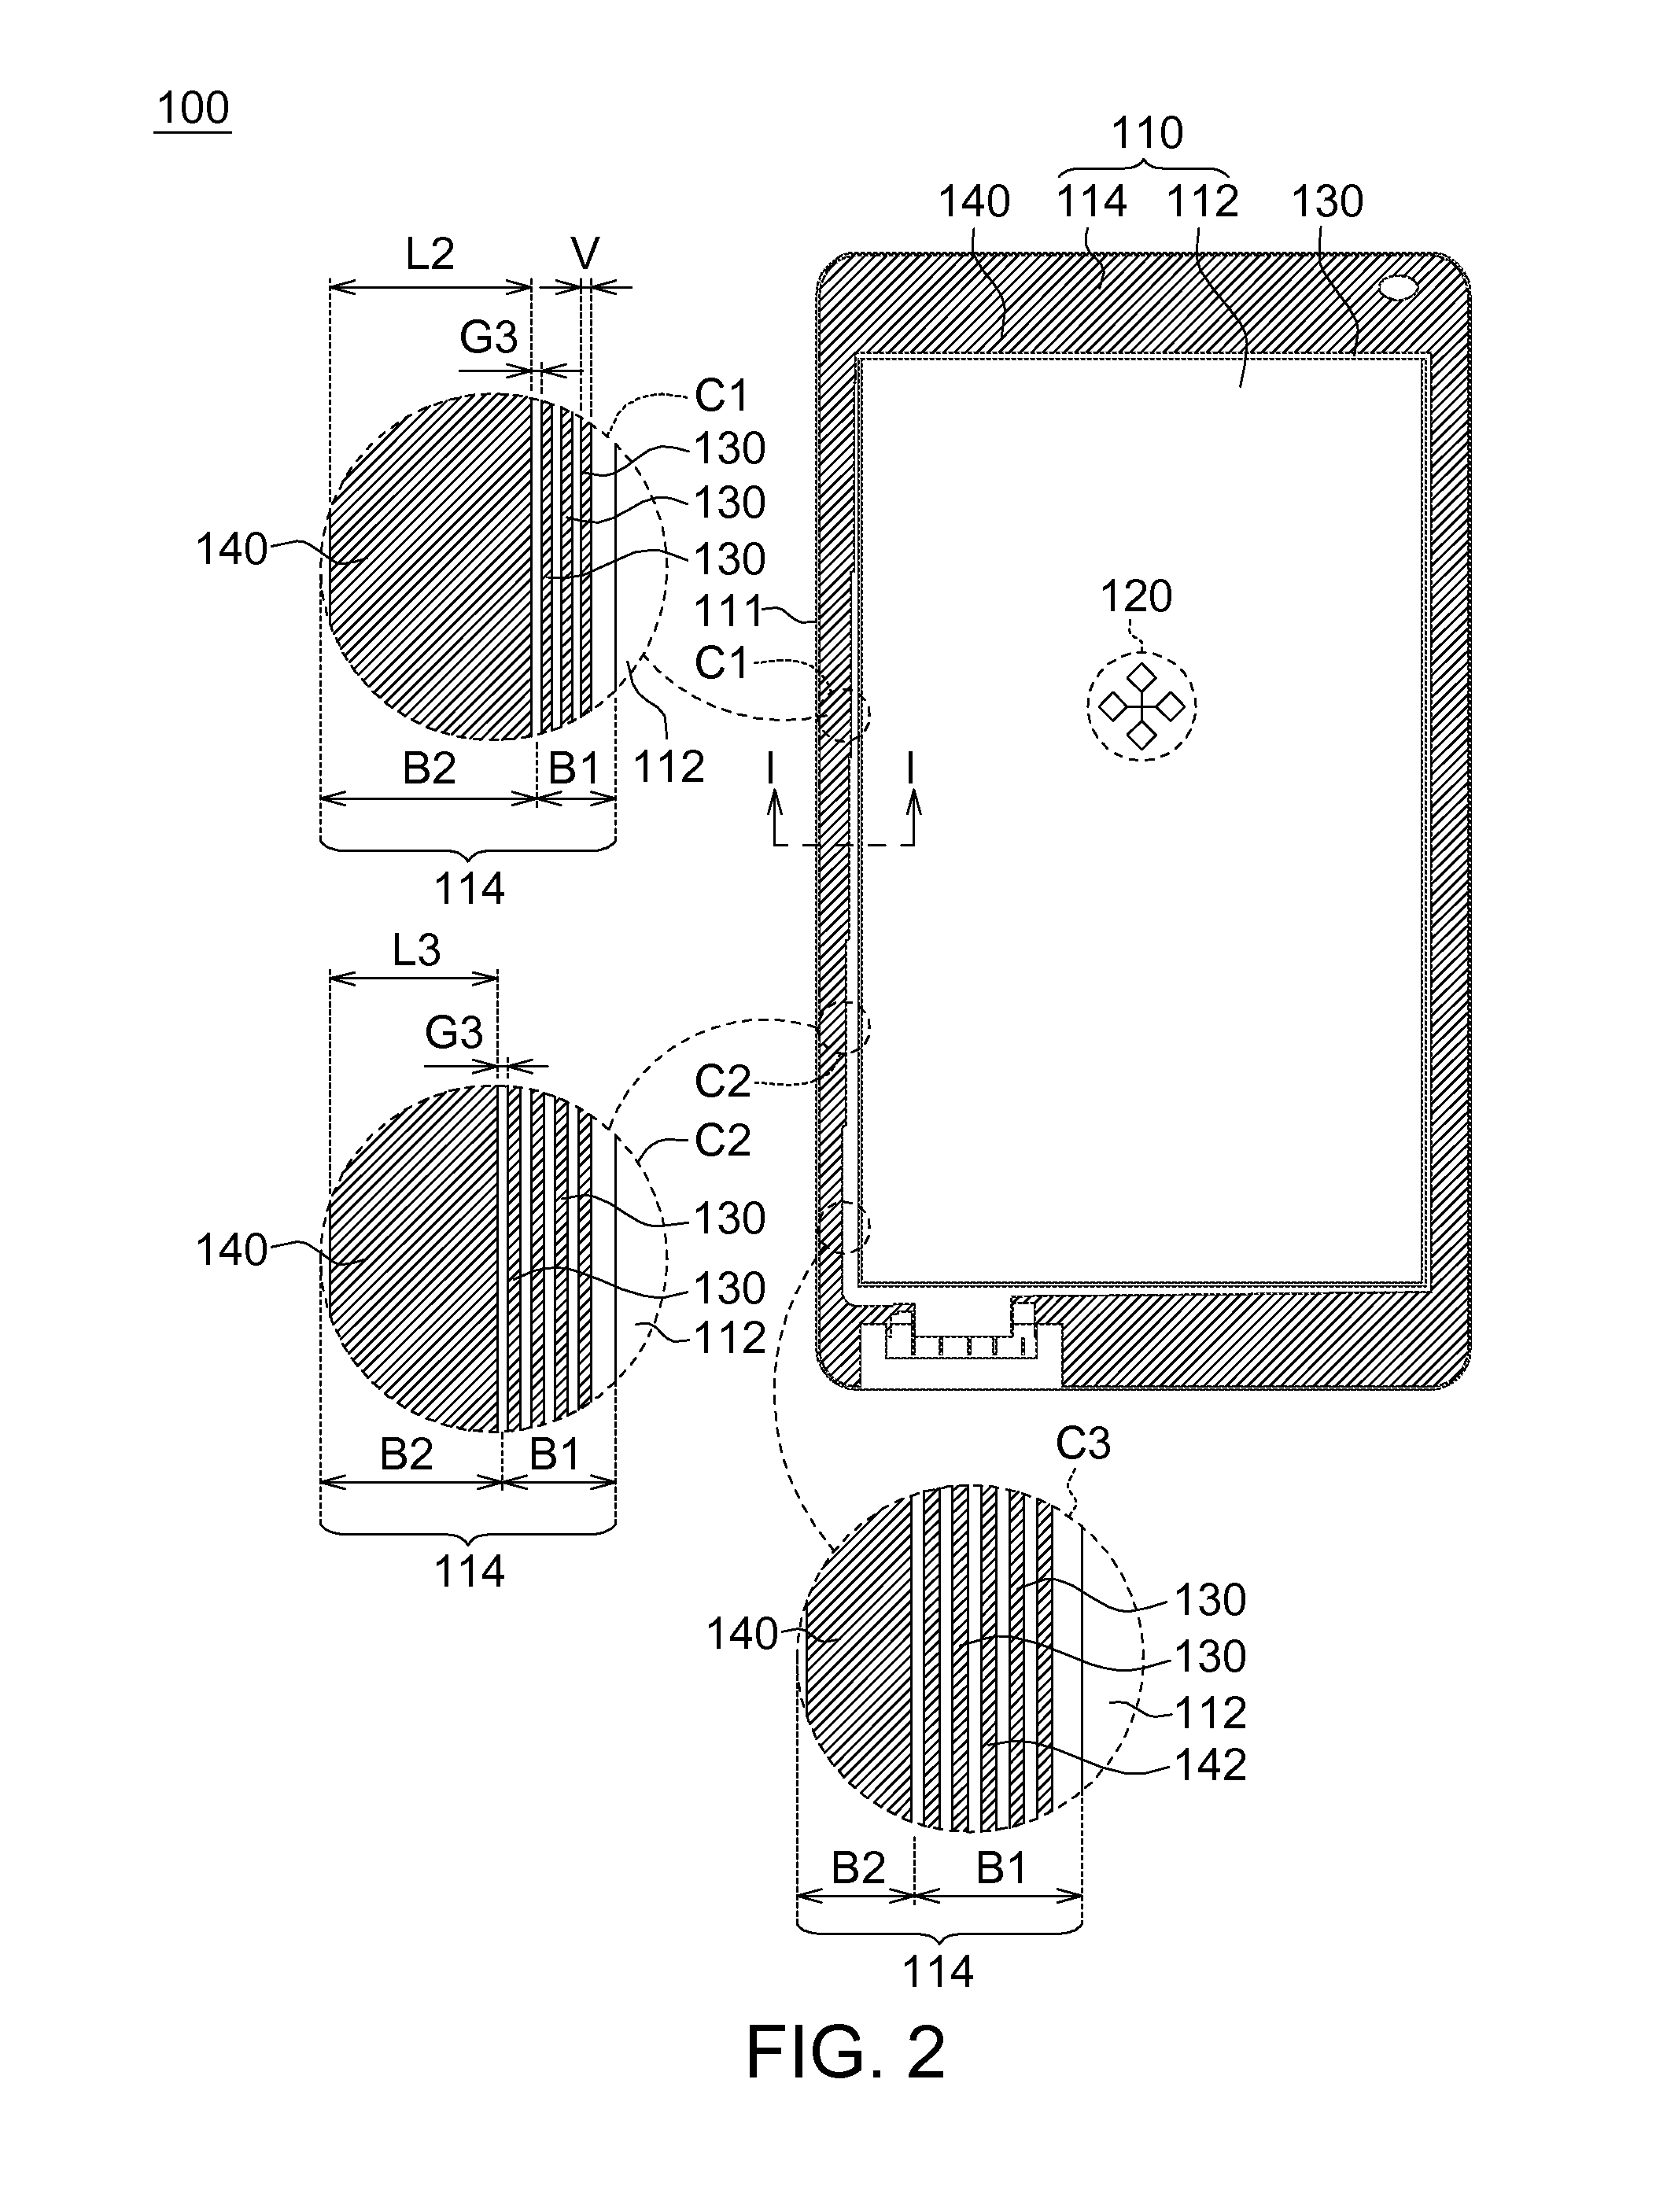 Touch panel having electrostatic protection